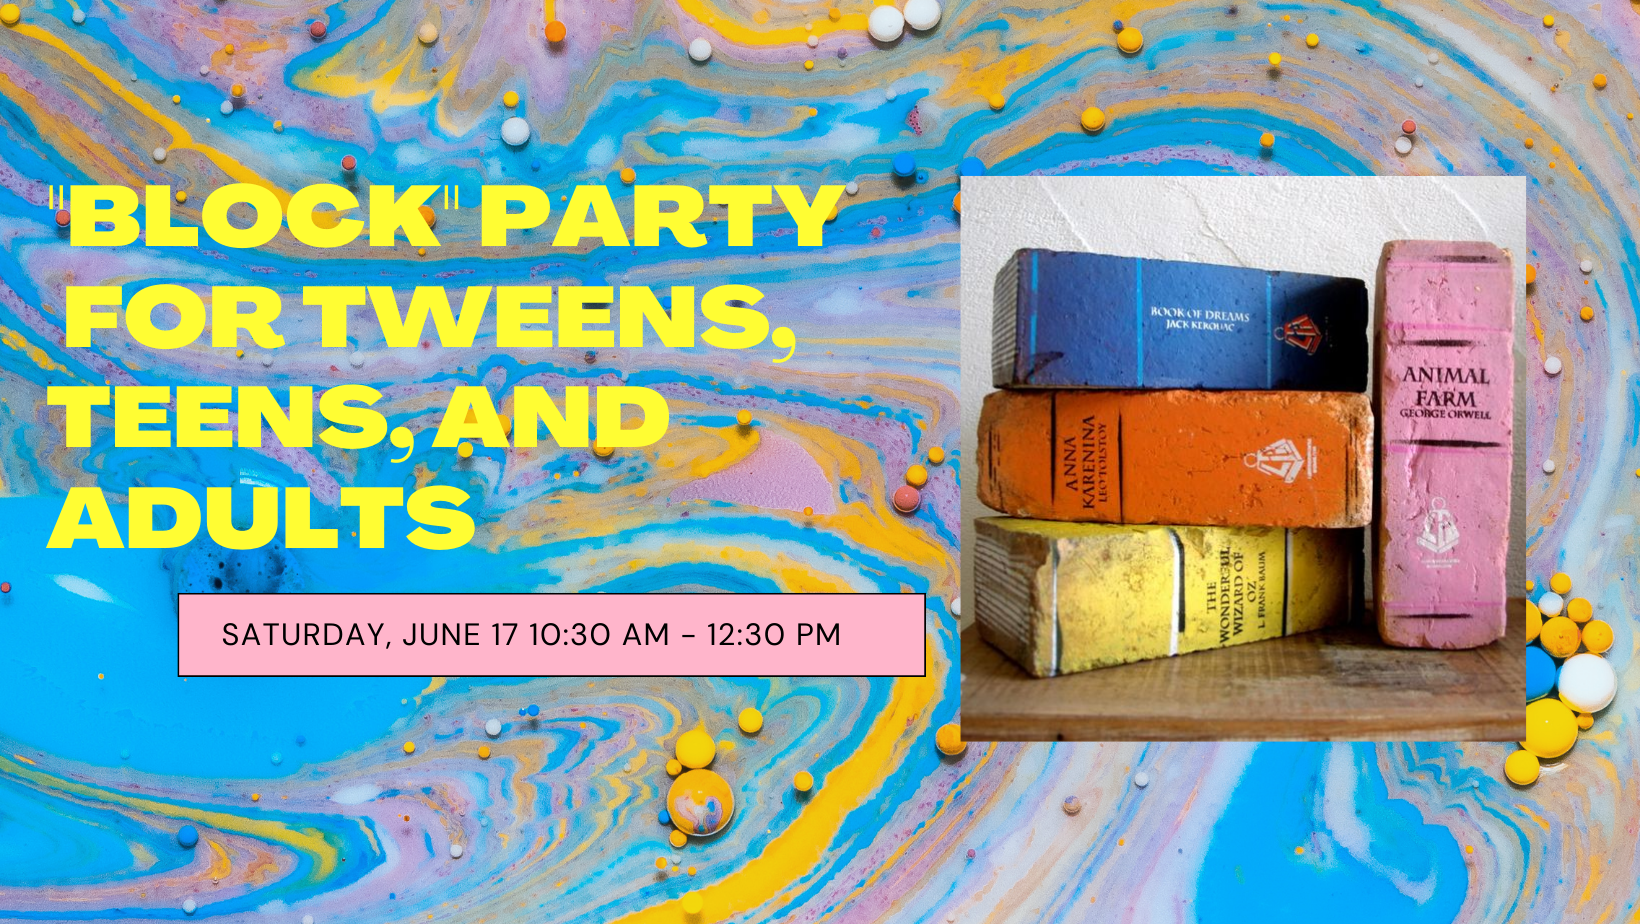 Block Party for Tweens, Teens, and Adults June 17 10:30 am thru12:30 pm